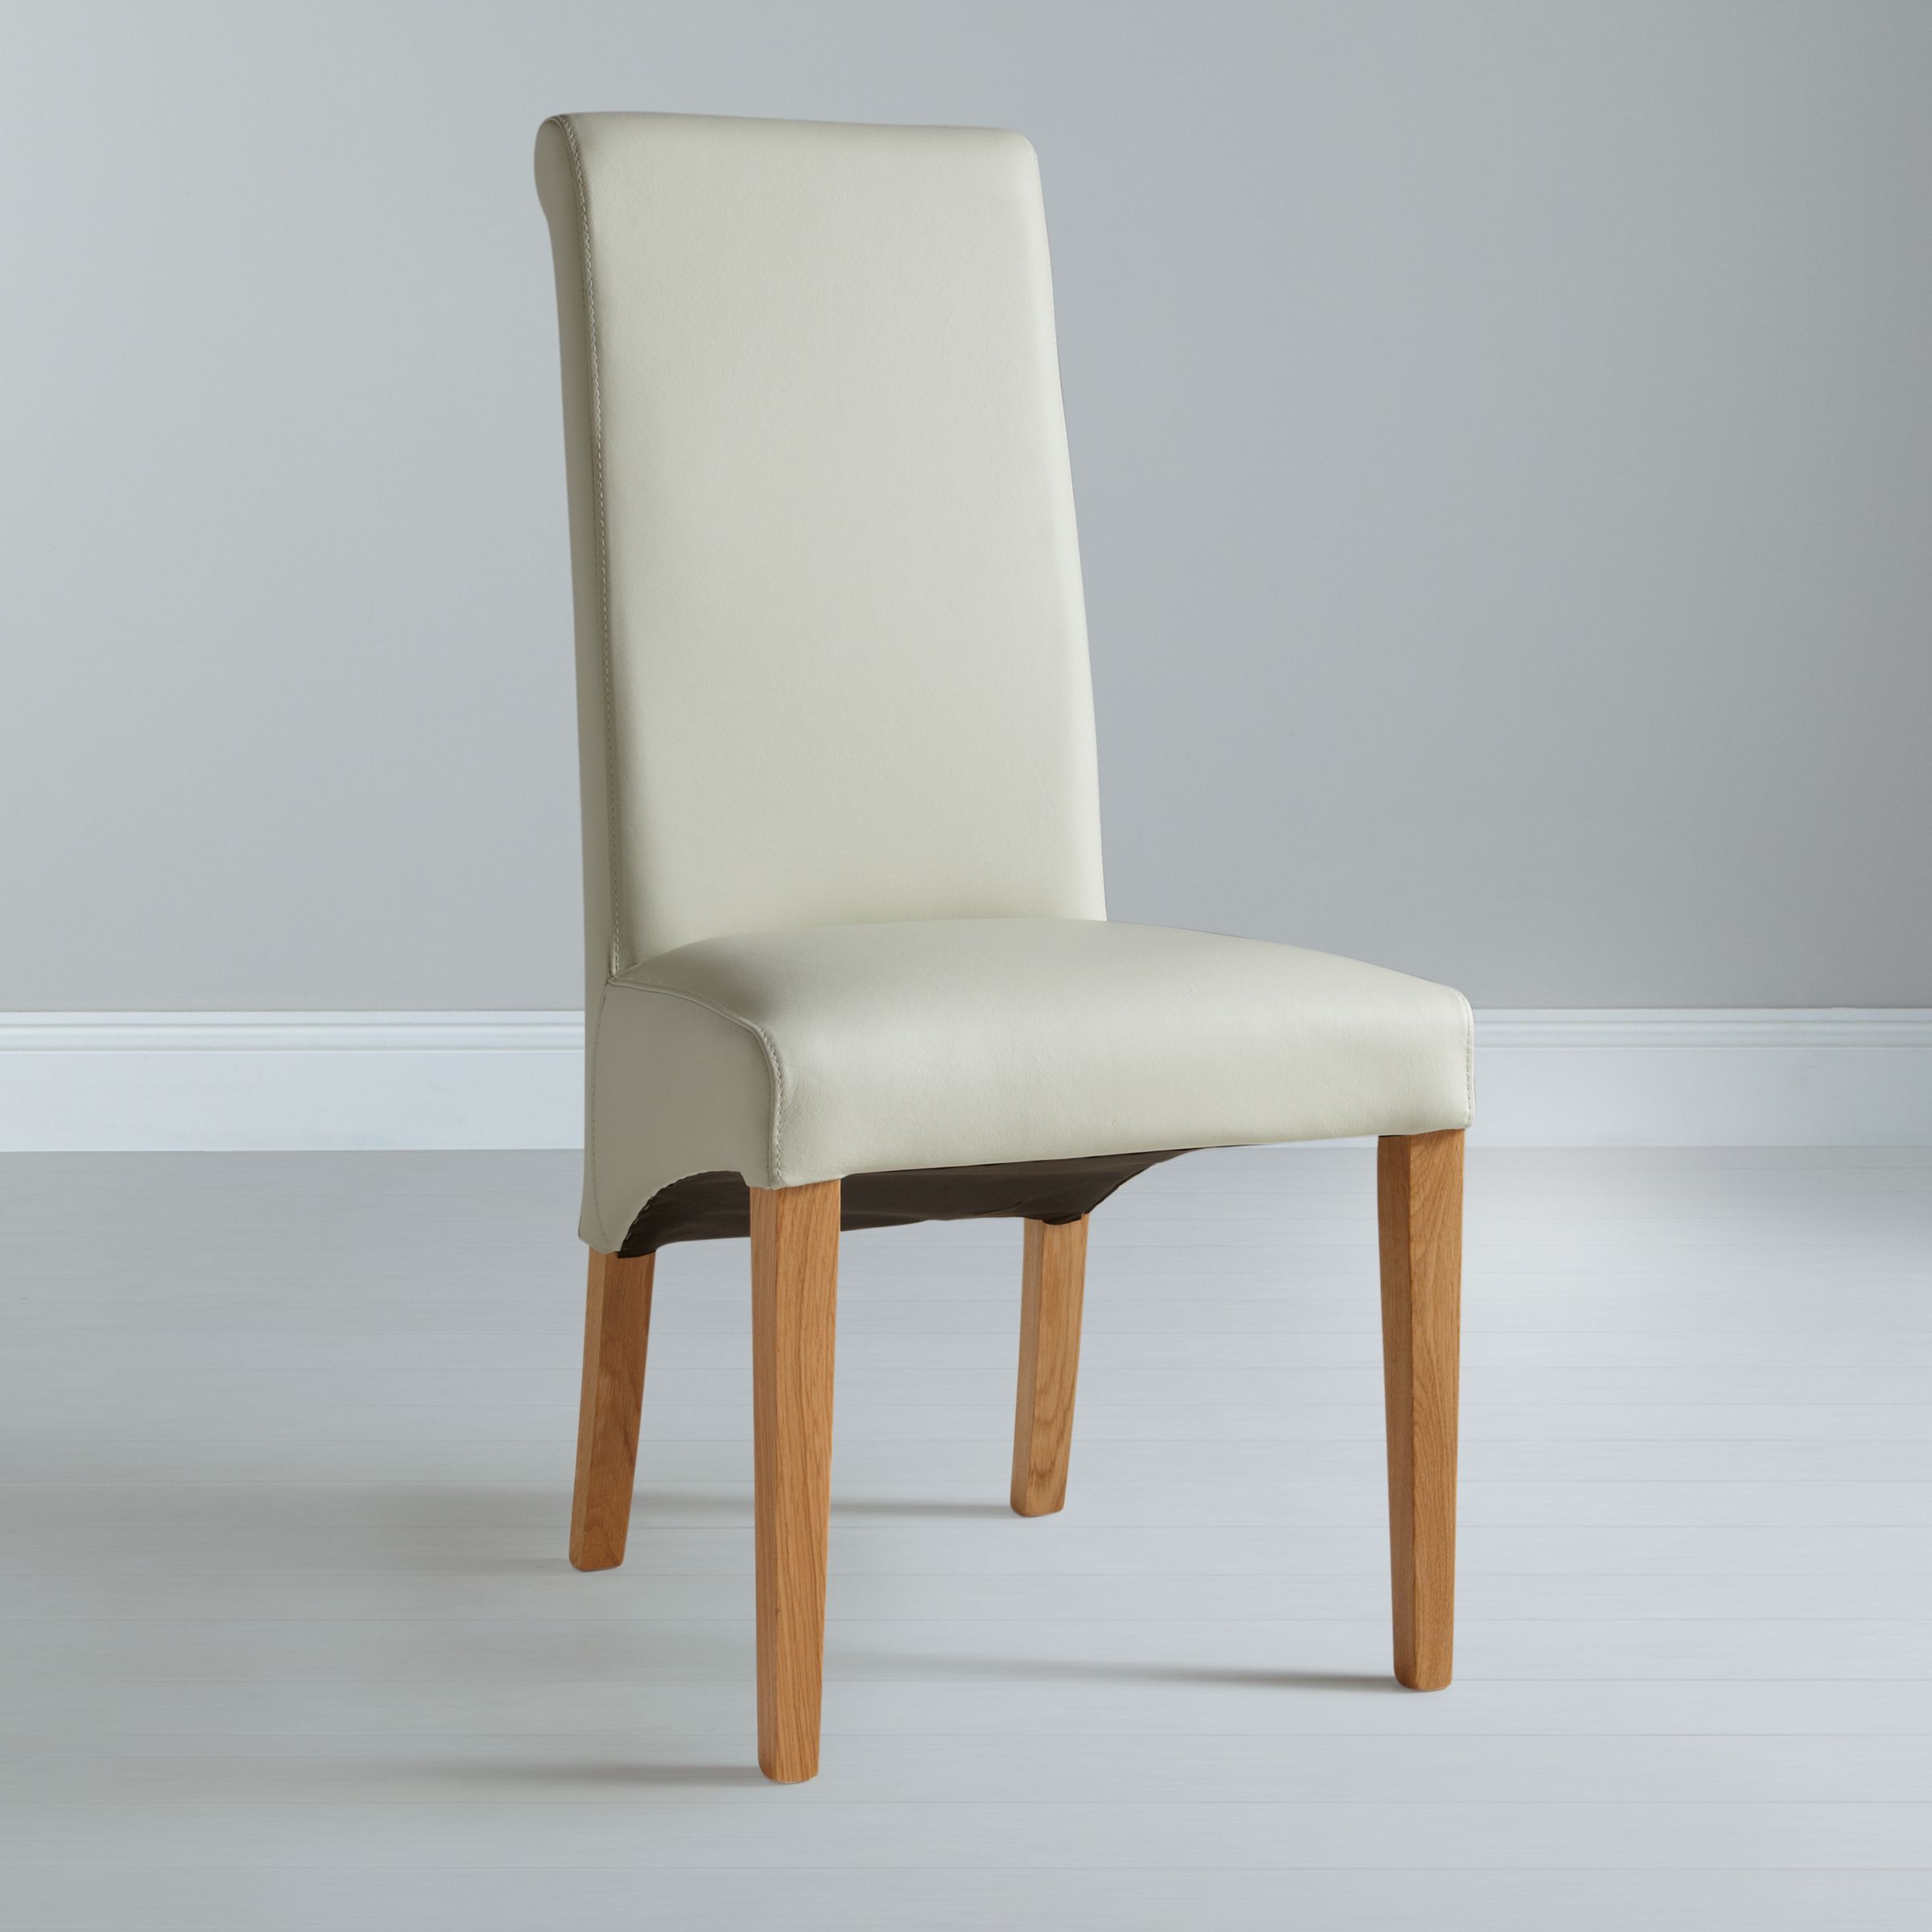 John Lewis Patricia Leather Dining Chair, Ivory at John Lewis